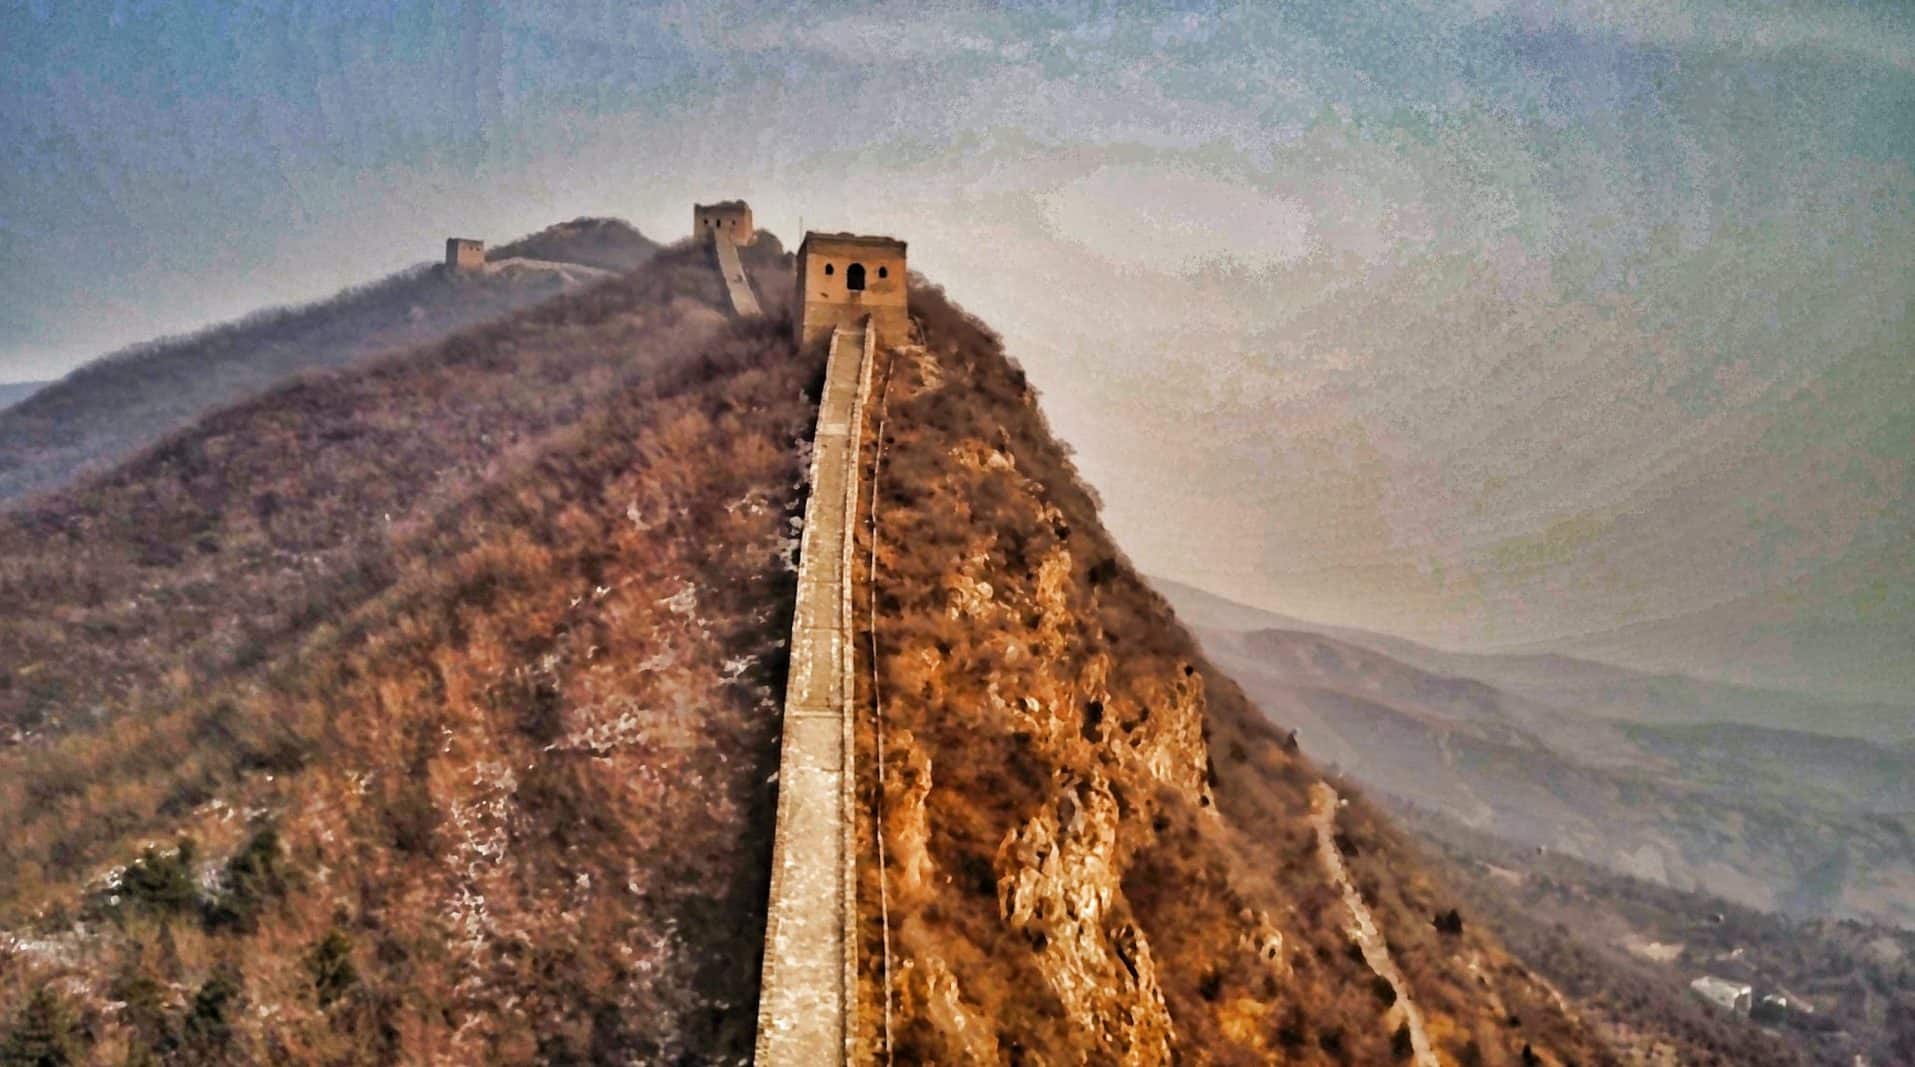 Simatai Great Wall is the most spectacular section of the China